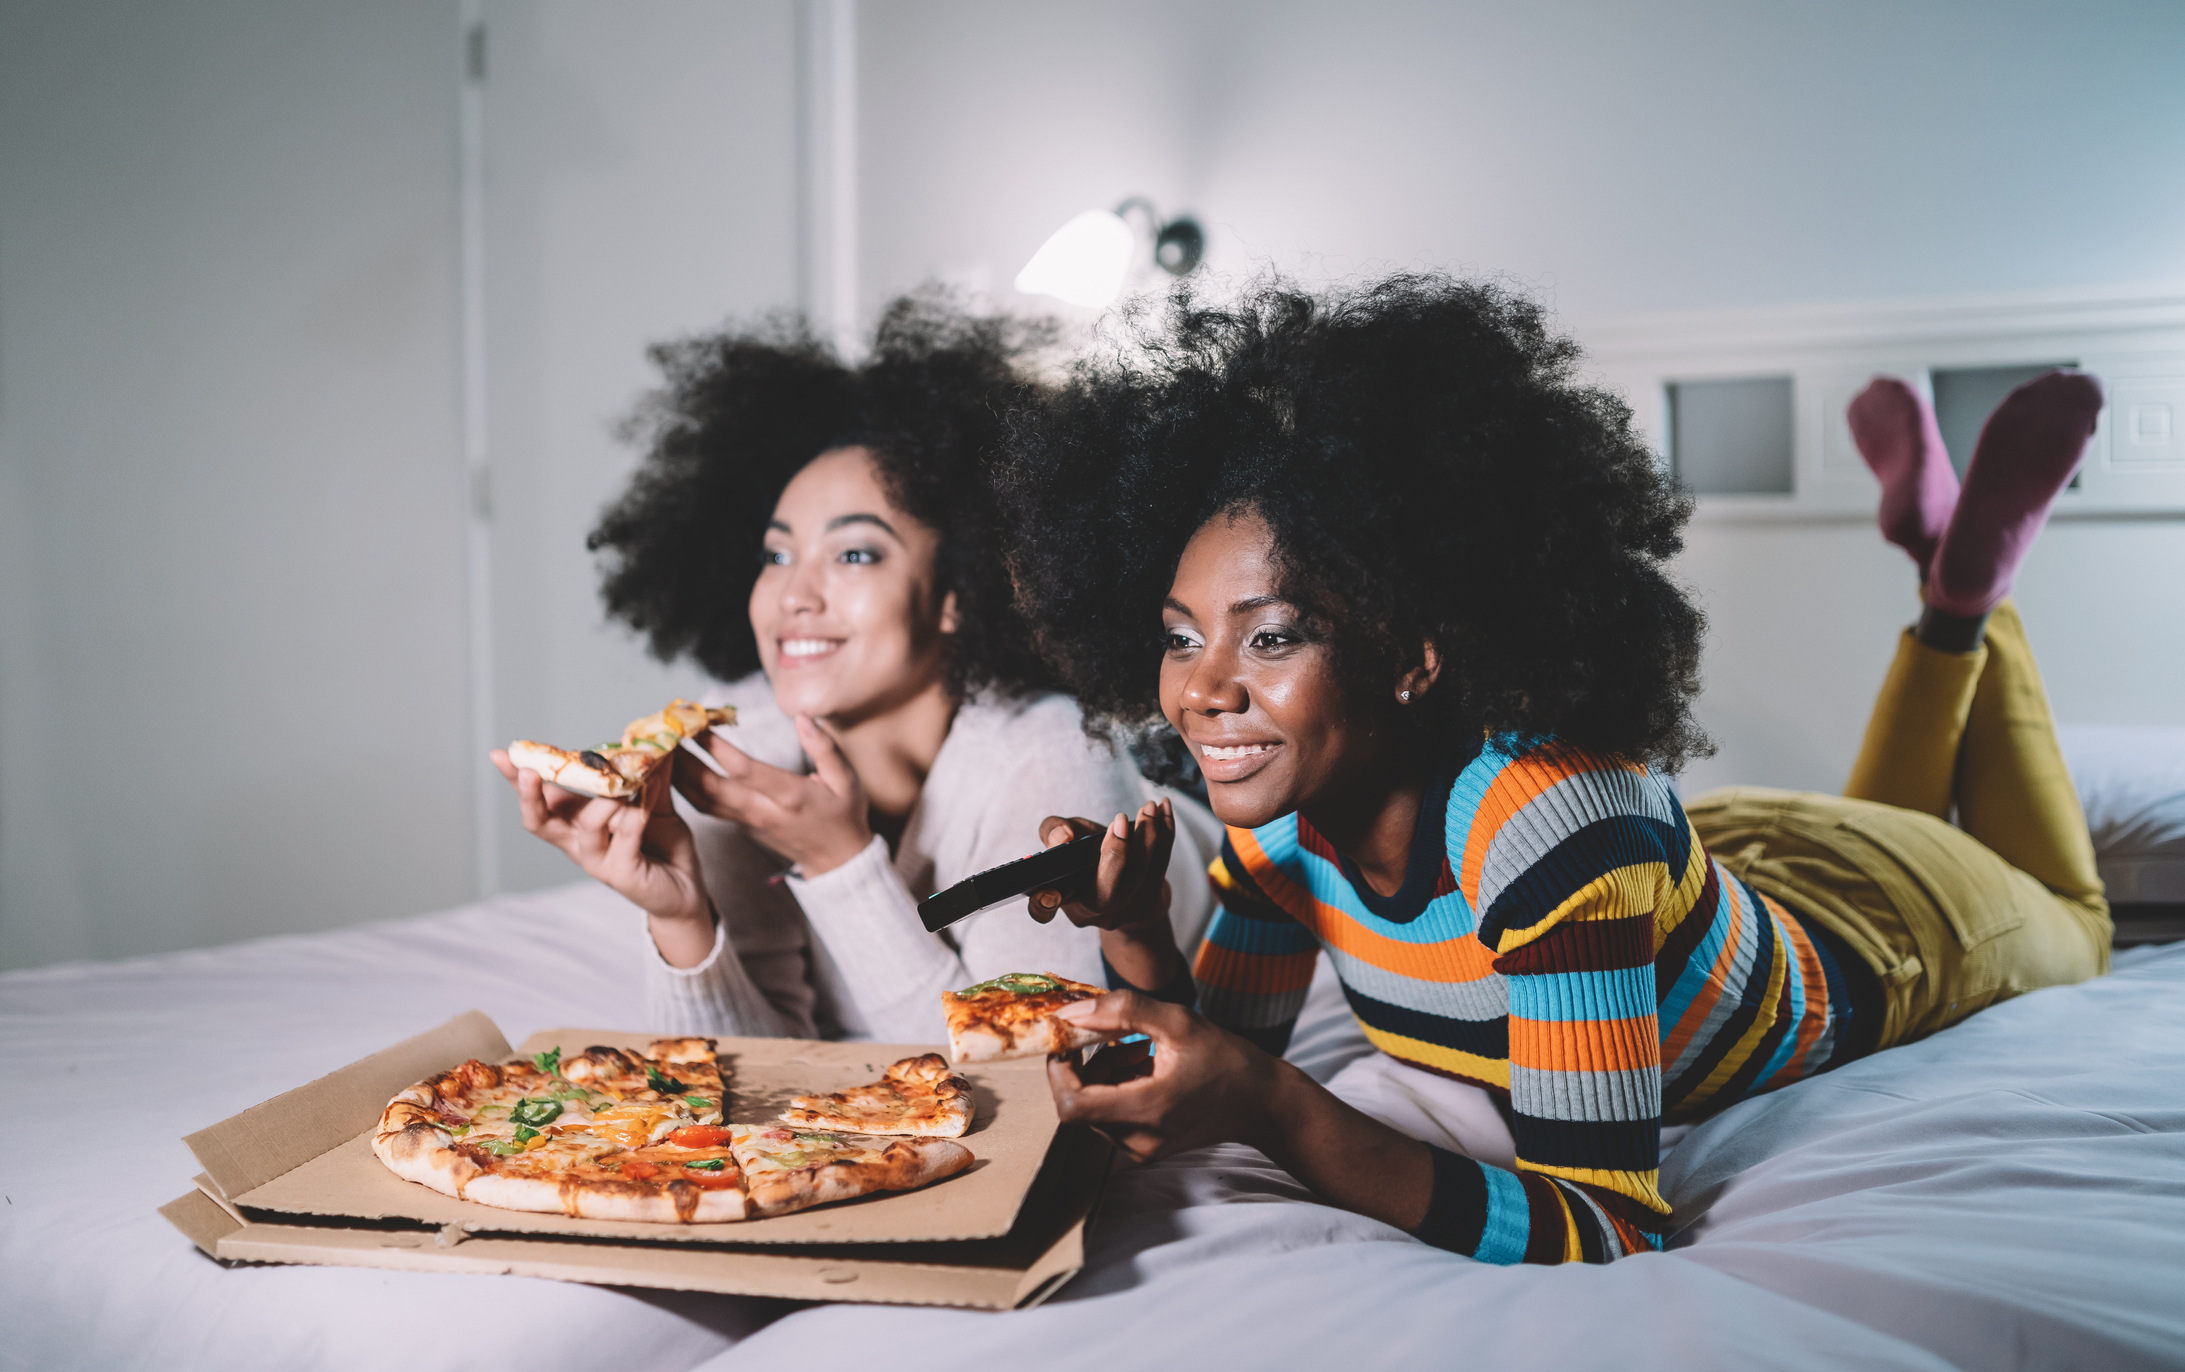 This Black-Owned Brand Just Made History As Donatos Pizza's Largest Traditional Franchisee